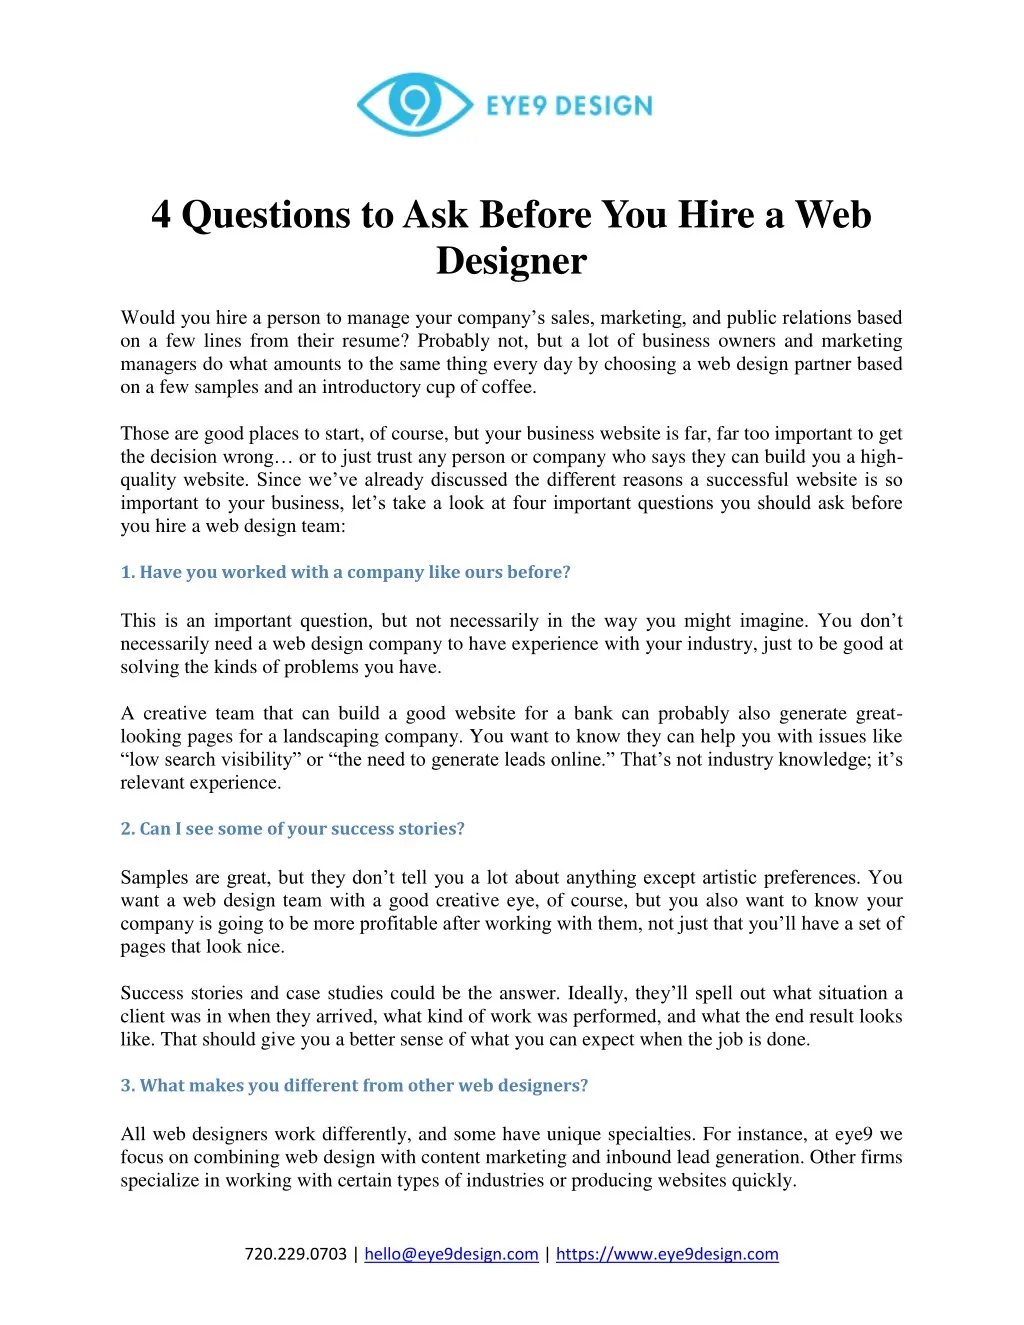 4 questions to ask before you hire a web designer